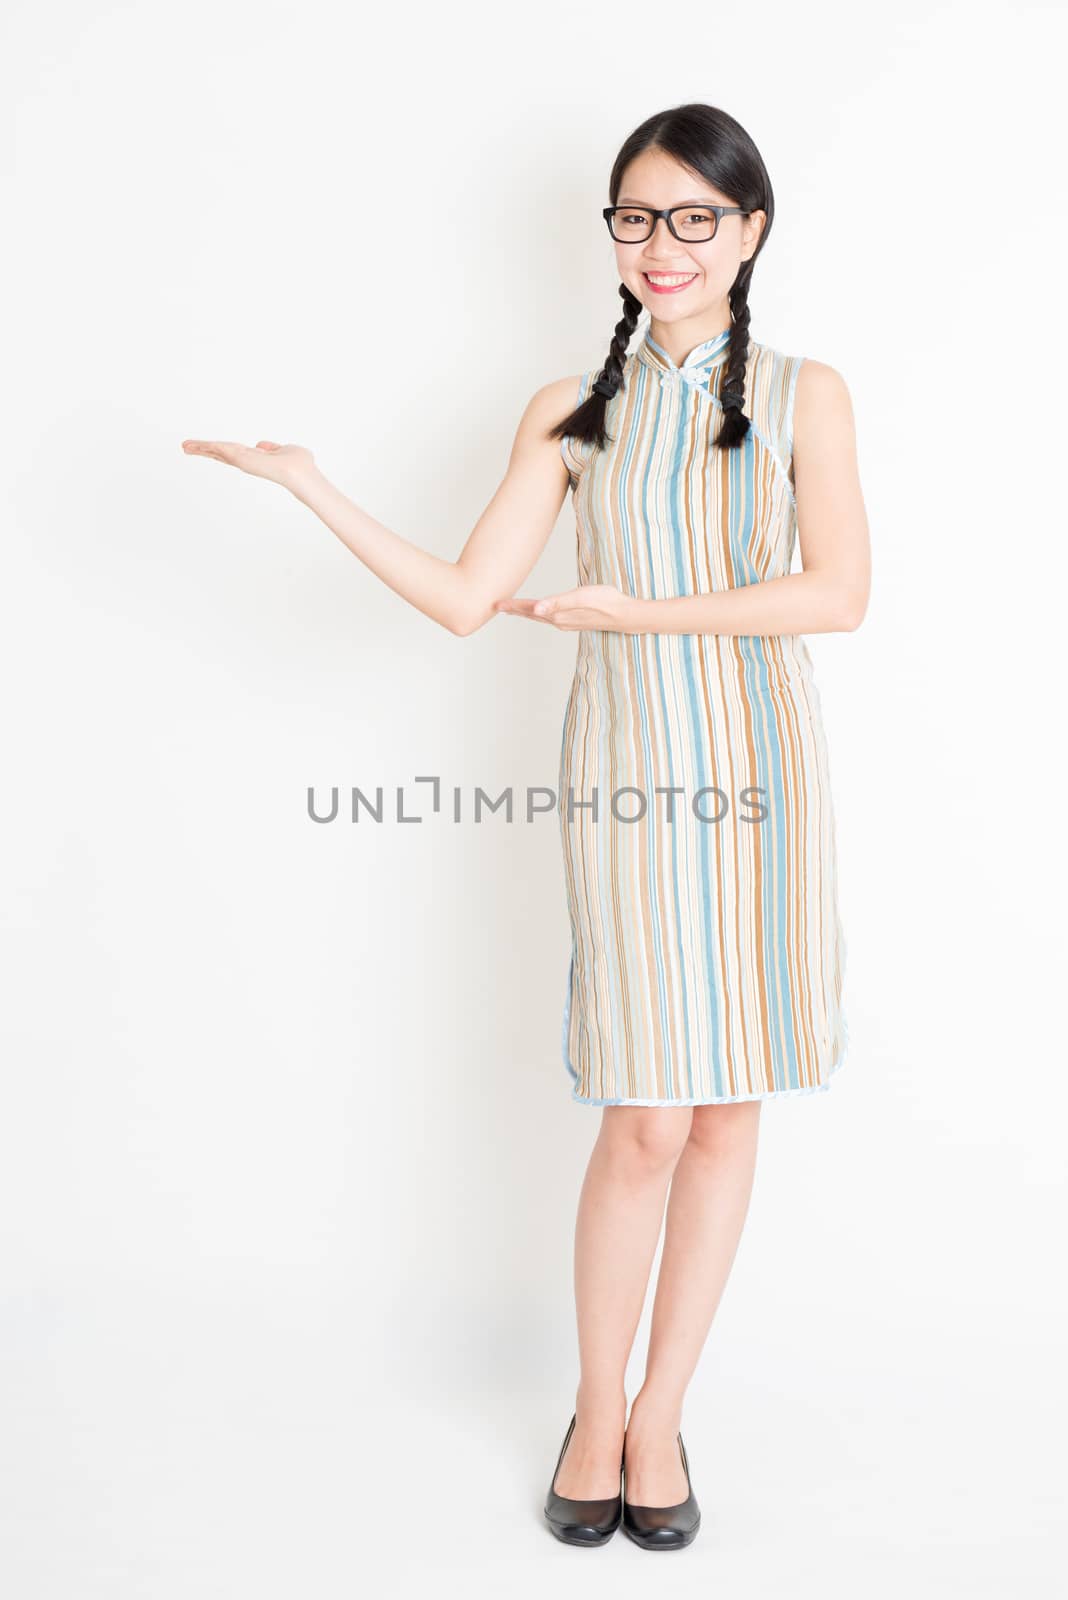 Portrait of young Asian girl in traditional qipao dress hands holding something, full length standing on plain background.